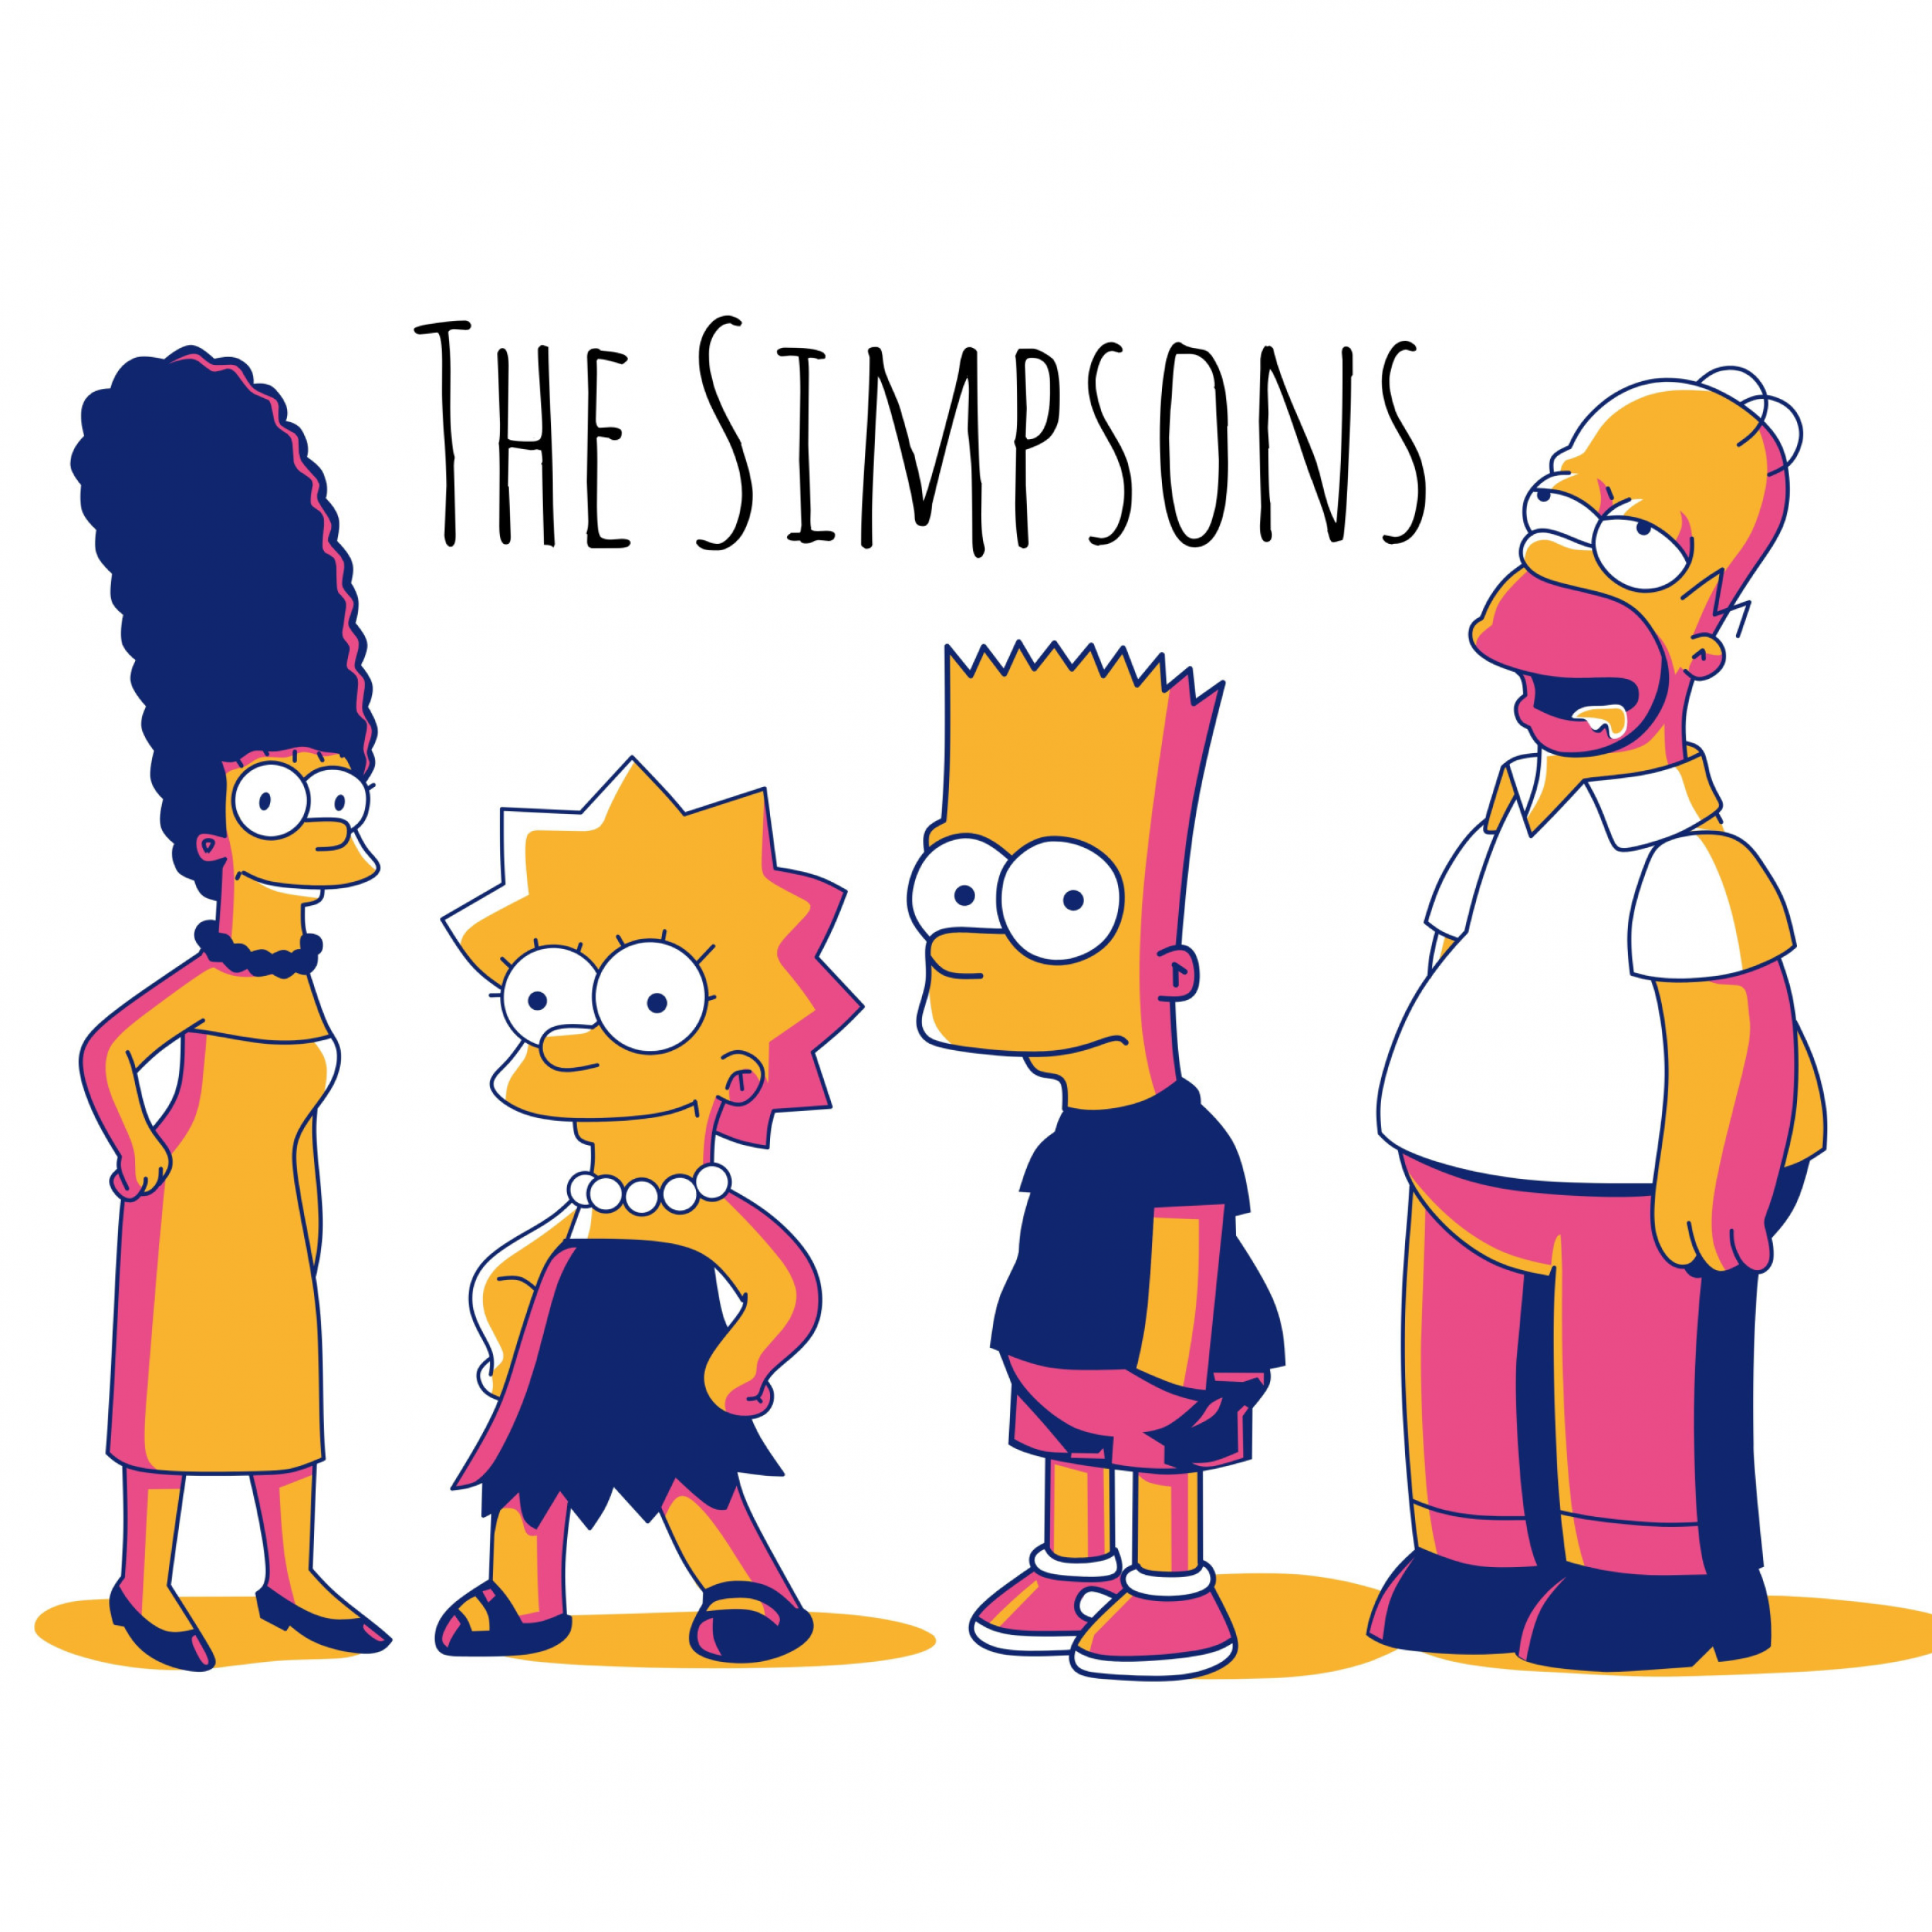 iphone wallpaper ipad parallax  simpsonspic  download at freeios7com   Simpsons art The simpsons Simpsons drawings